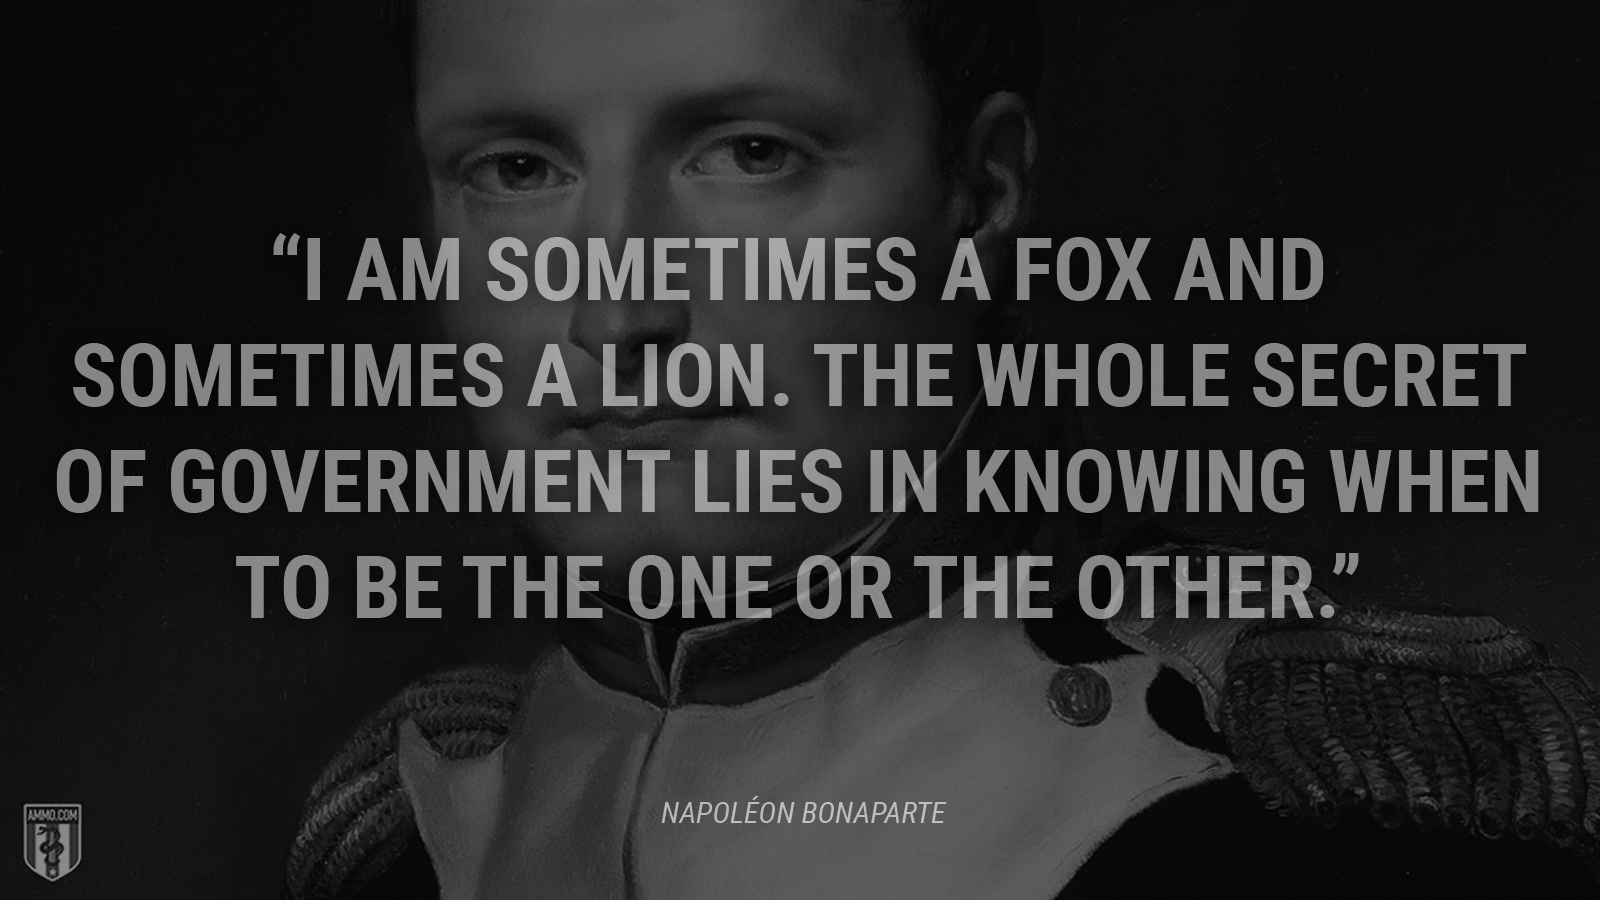 “I am sometimes a fox and sometimes a lion. The whole secret of government lies in knowing when to be the one or the other.” - Napoléon Bonaparte